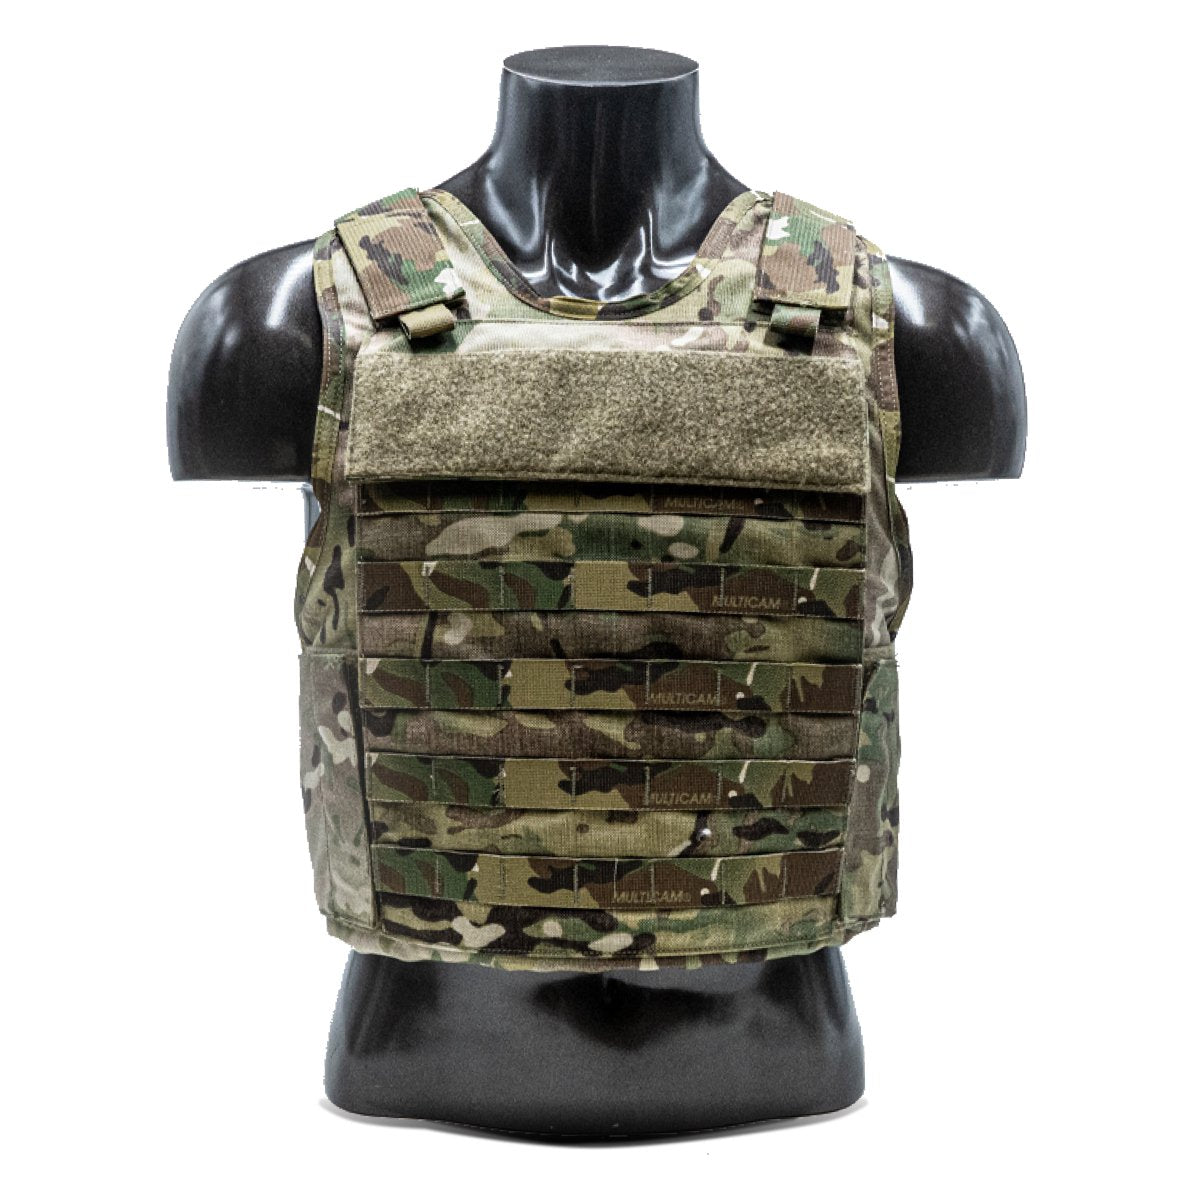 A Body Armor Direct All Star Tactical Enhanced Multi-Threat Vest plate carrier on a mannequin.